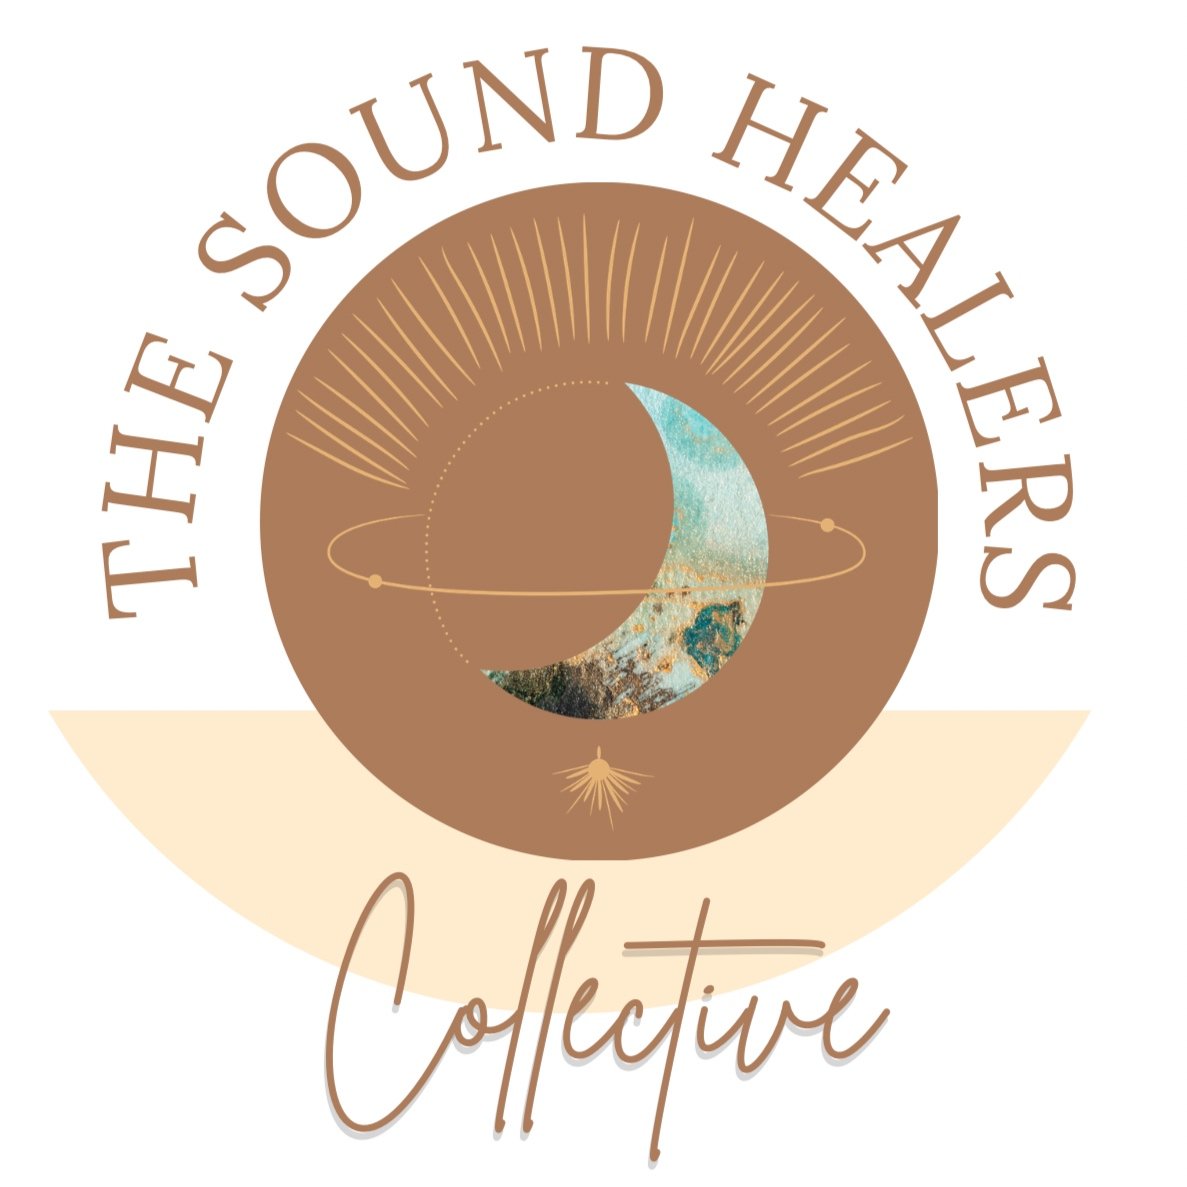 The Sound Healers Collective